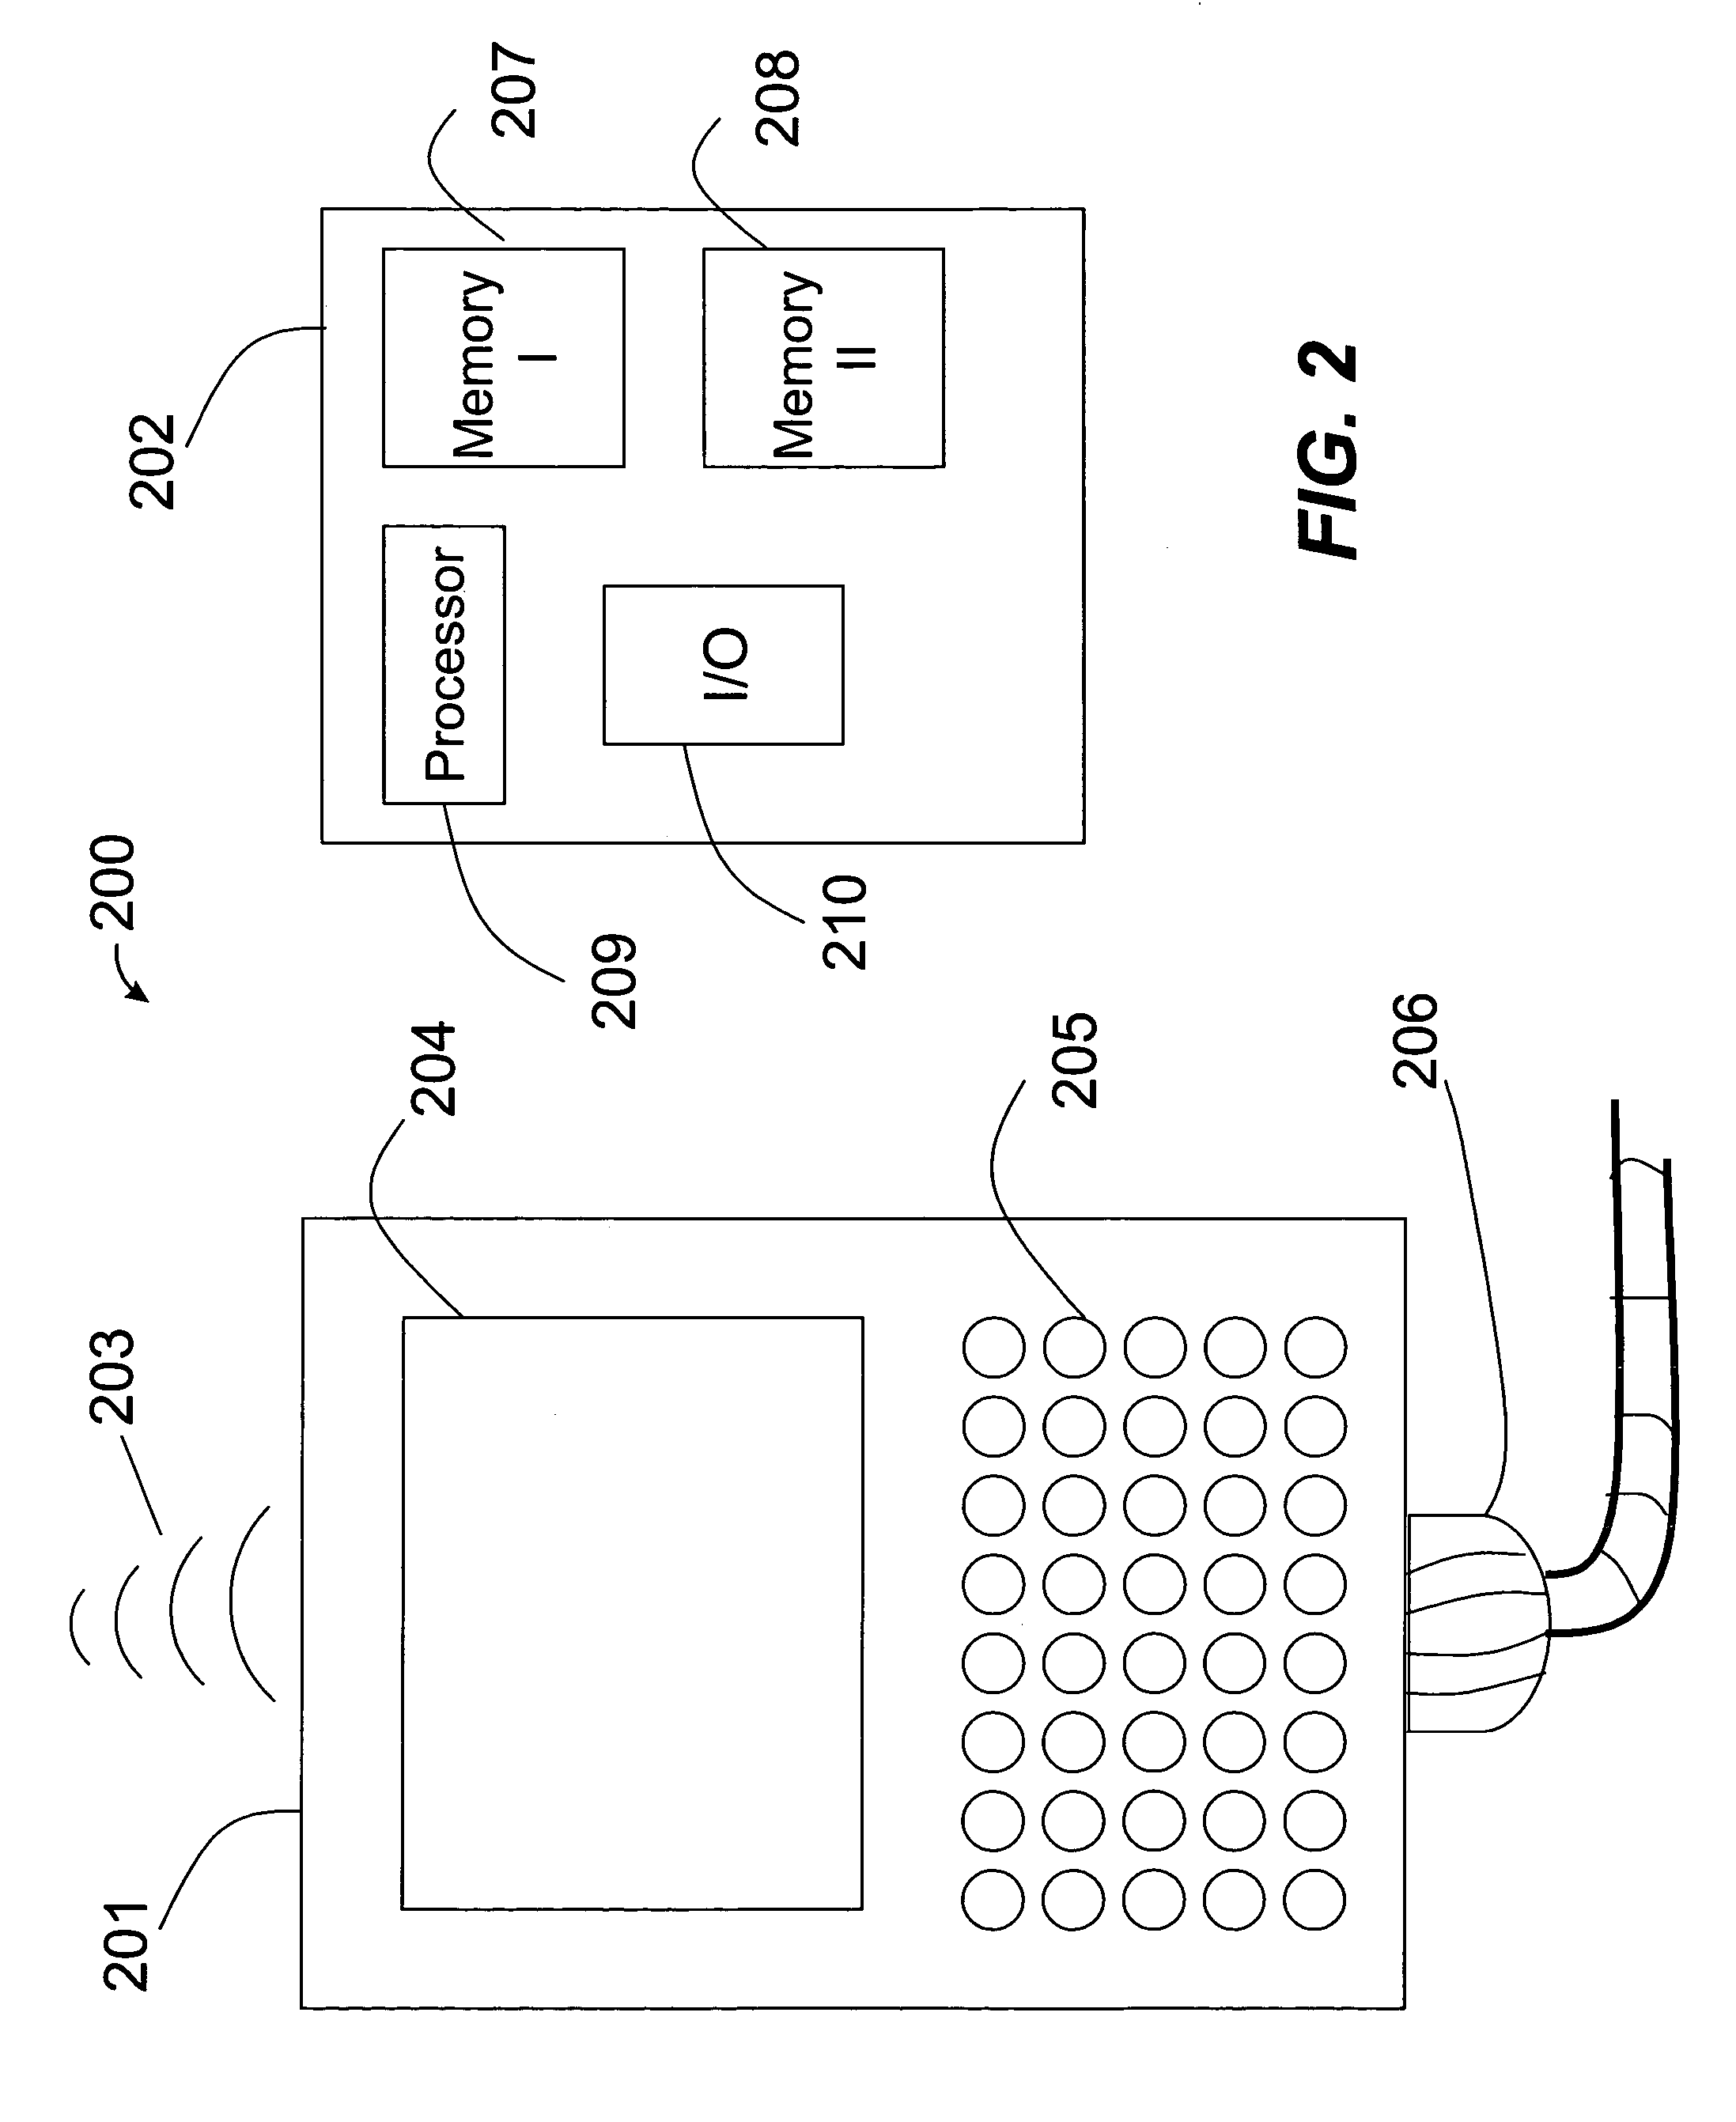 Apparatus and method for peer-to-peer N-way synchronization in a decentralized environment